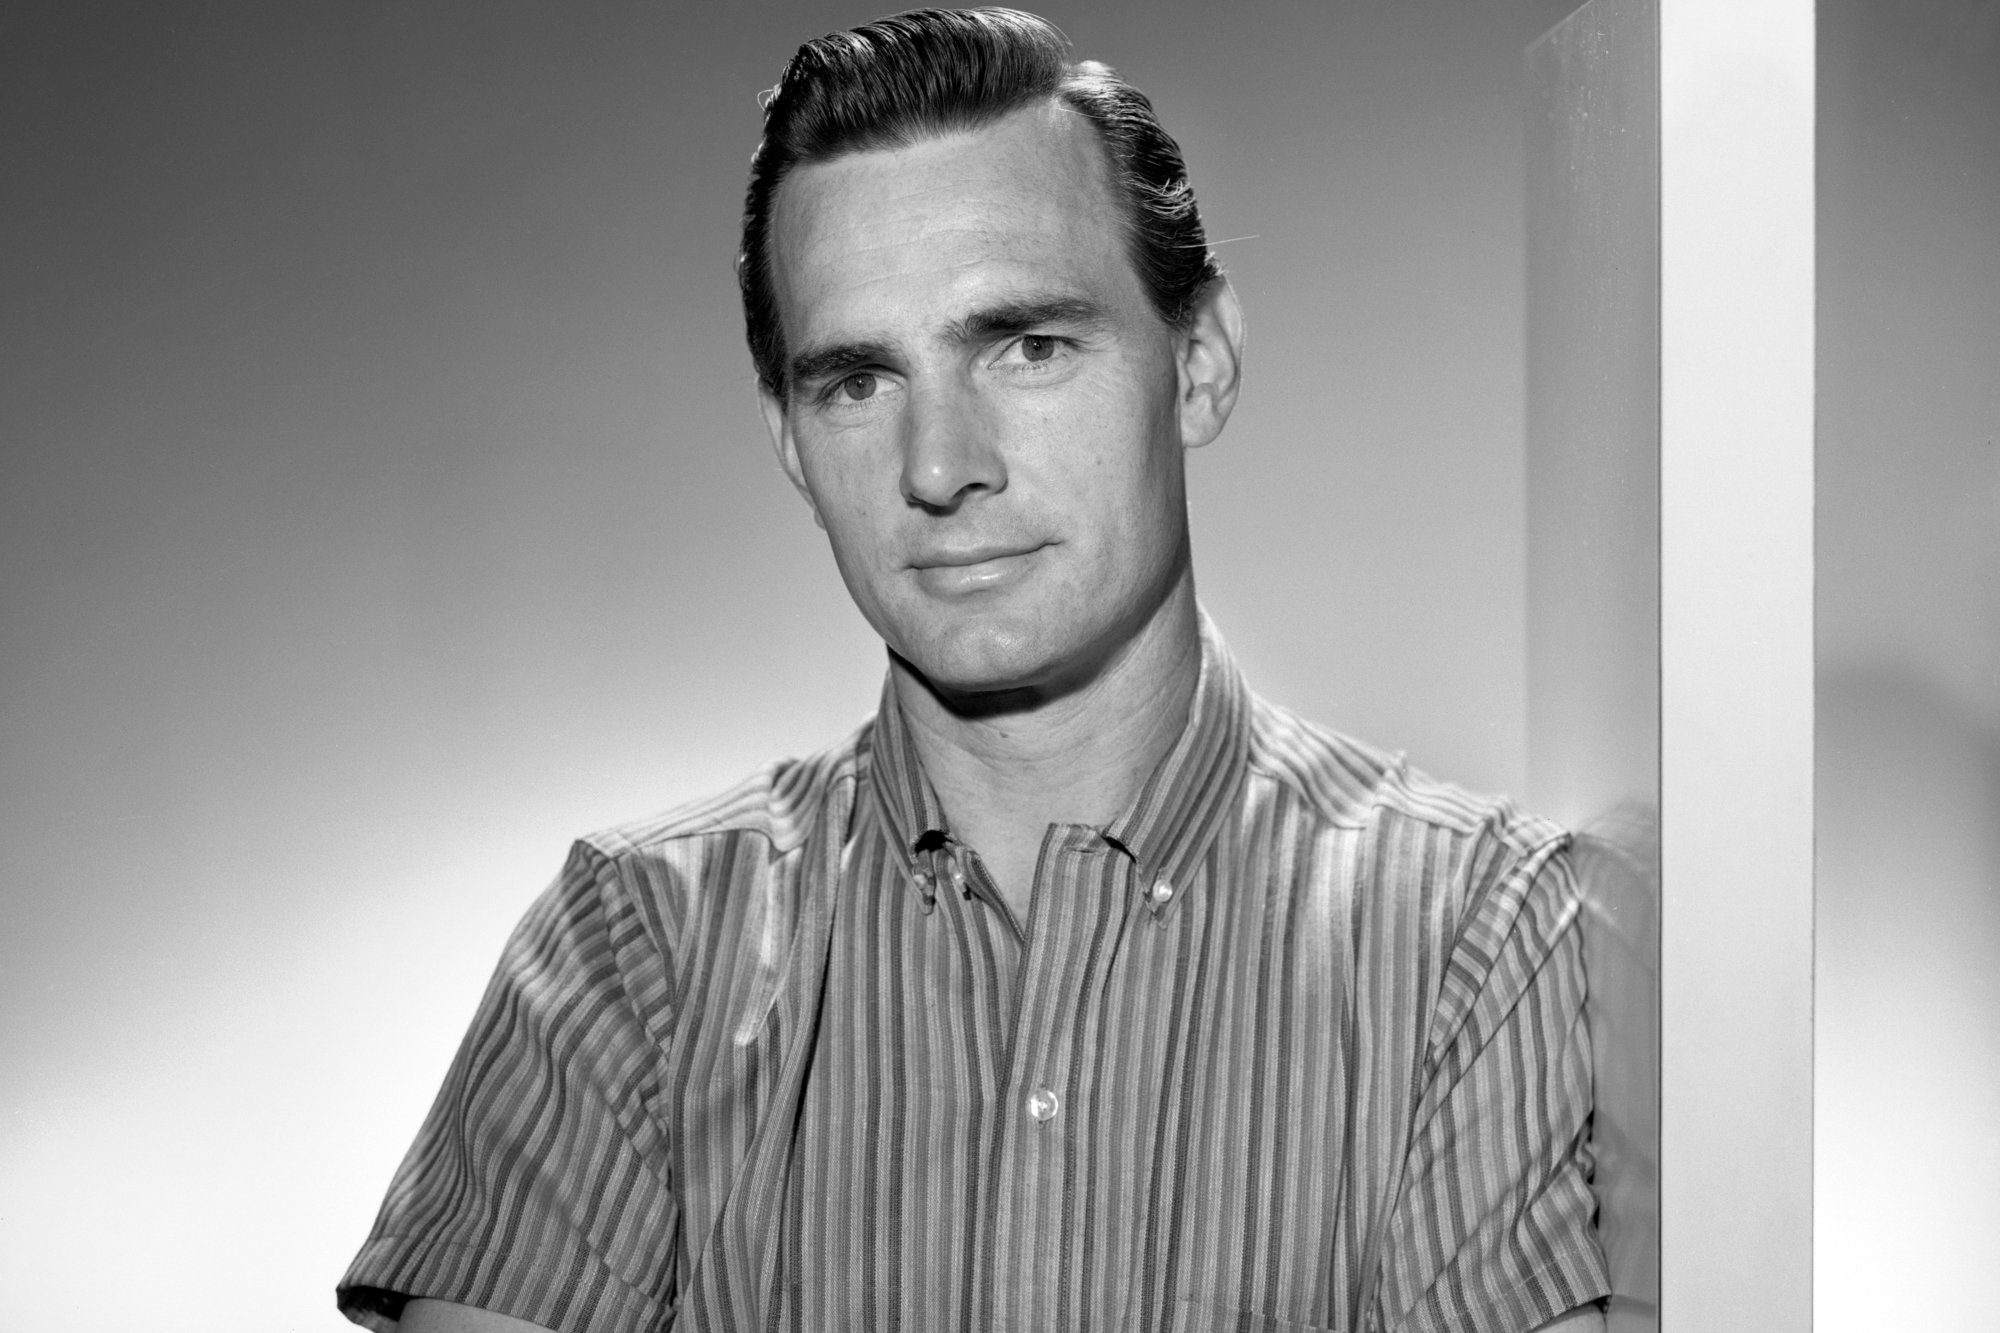 'Gunsmoke' actor Dennis Weaver in a black-and-white picture with his arms crossed wearing a striped collared-shirt